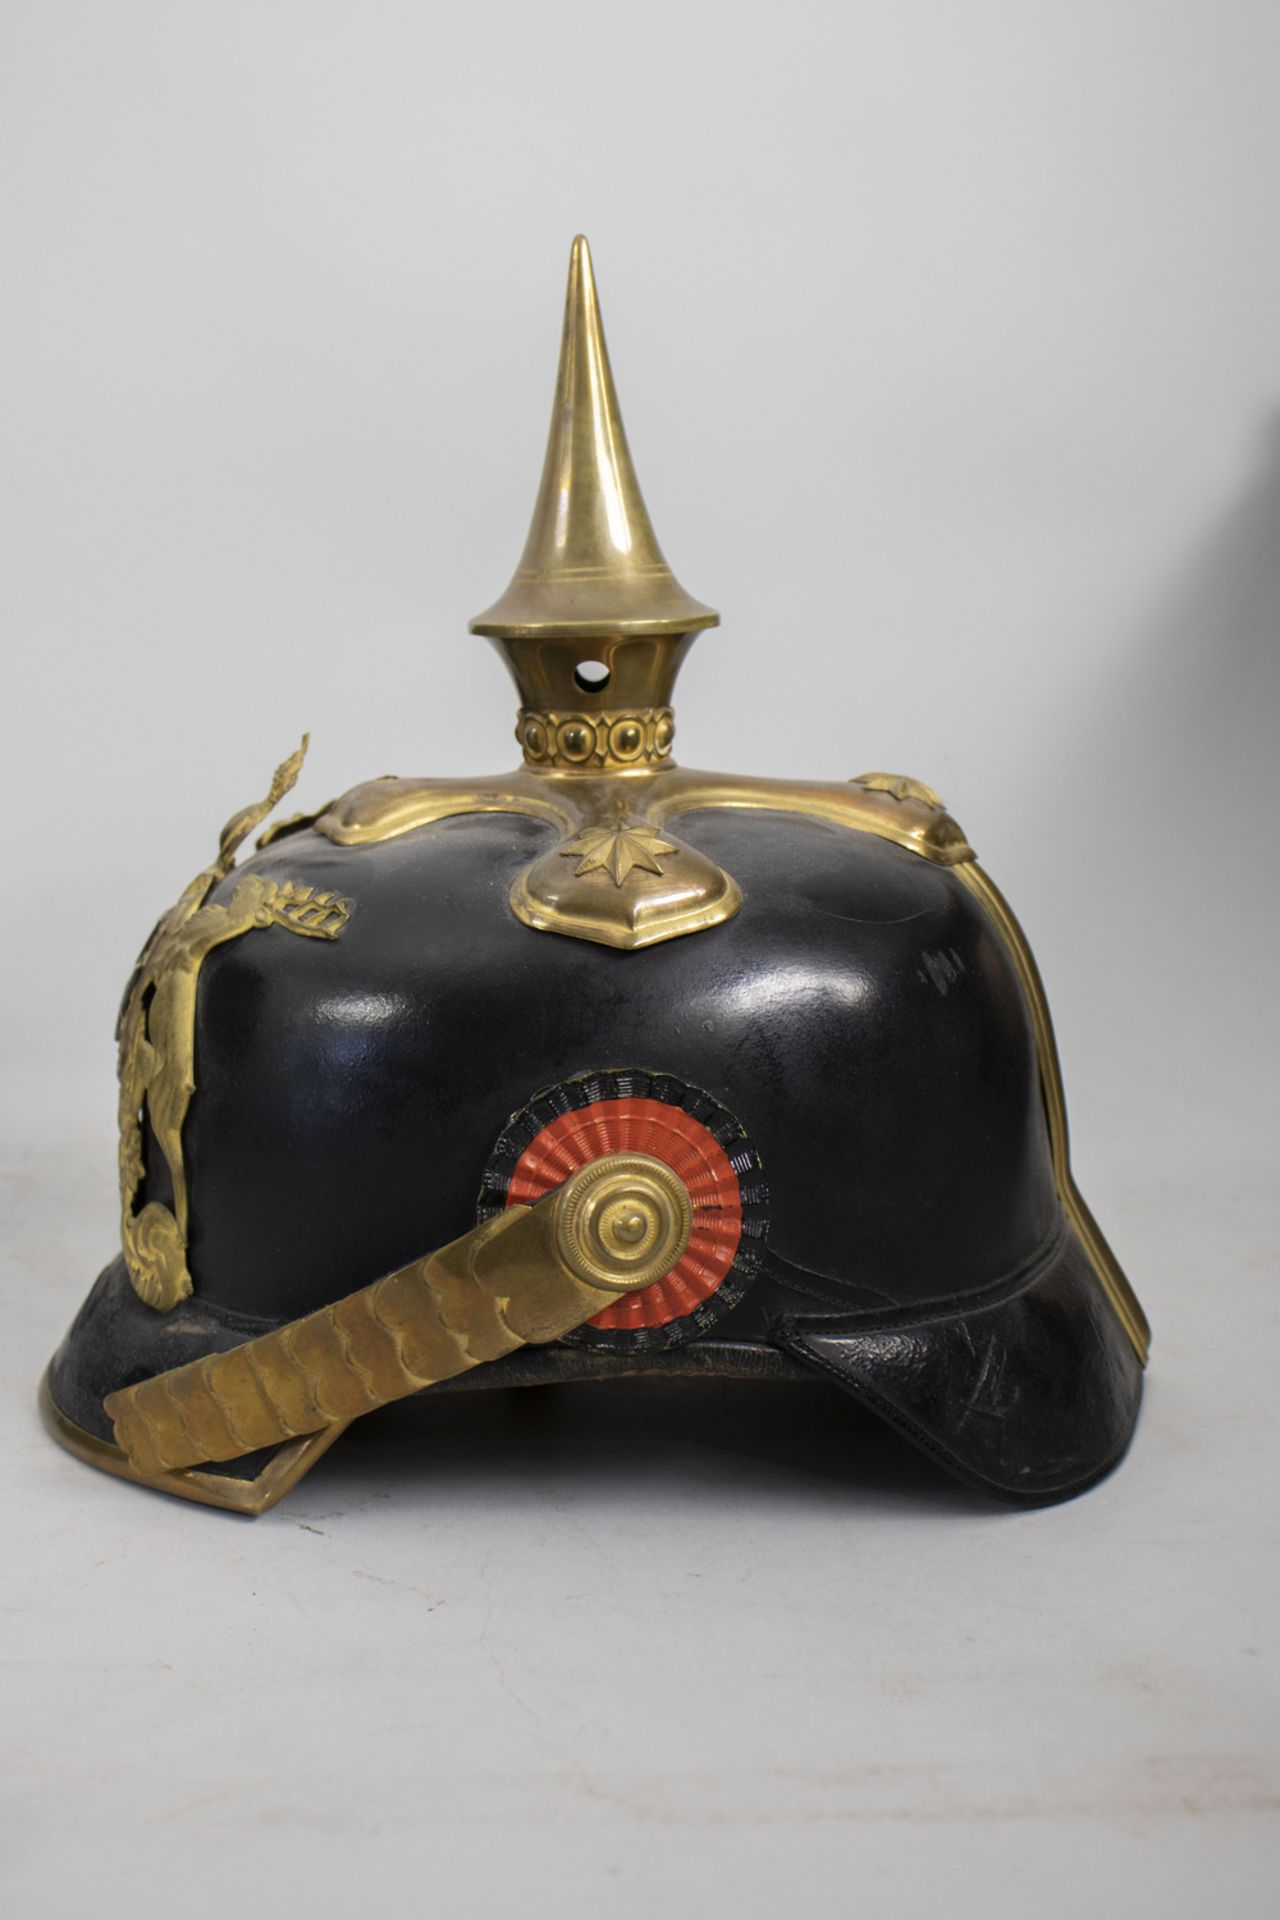 Pickelhaube mit Lederkoffer / A spiked helmet with leather box, Württemberg, um 1910 - Image 4 of 7